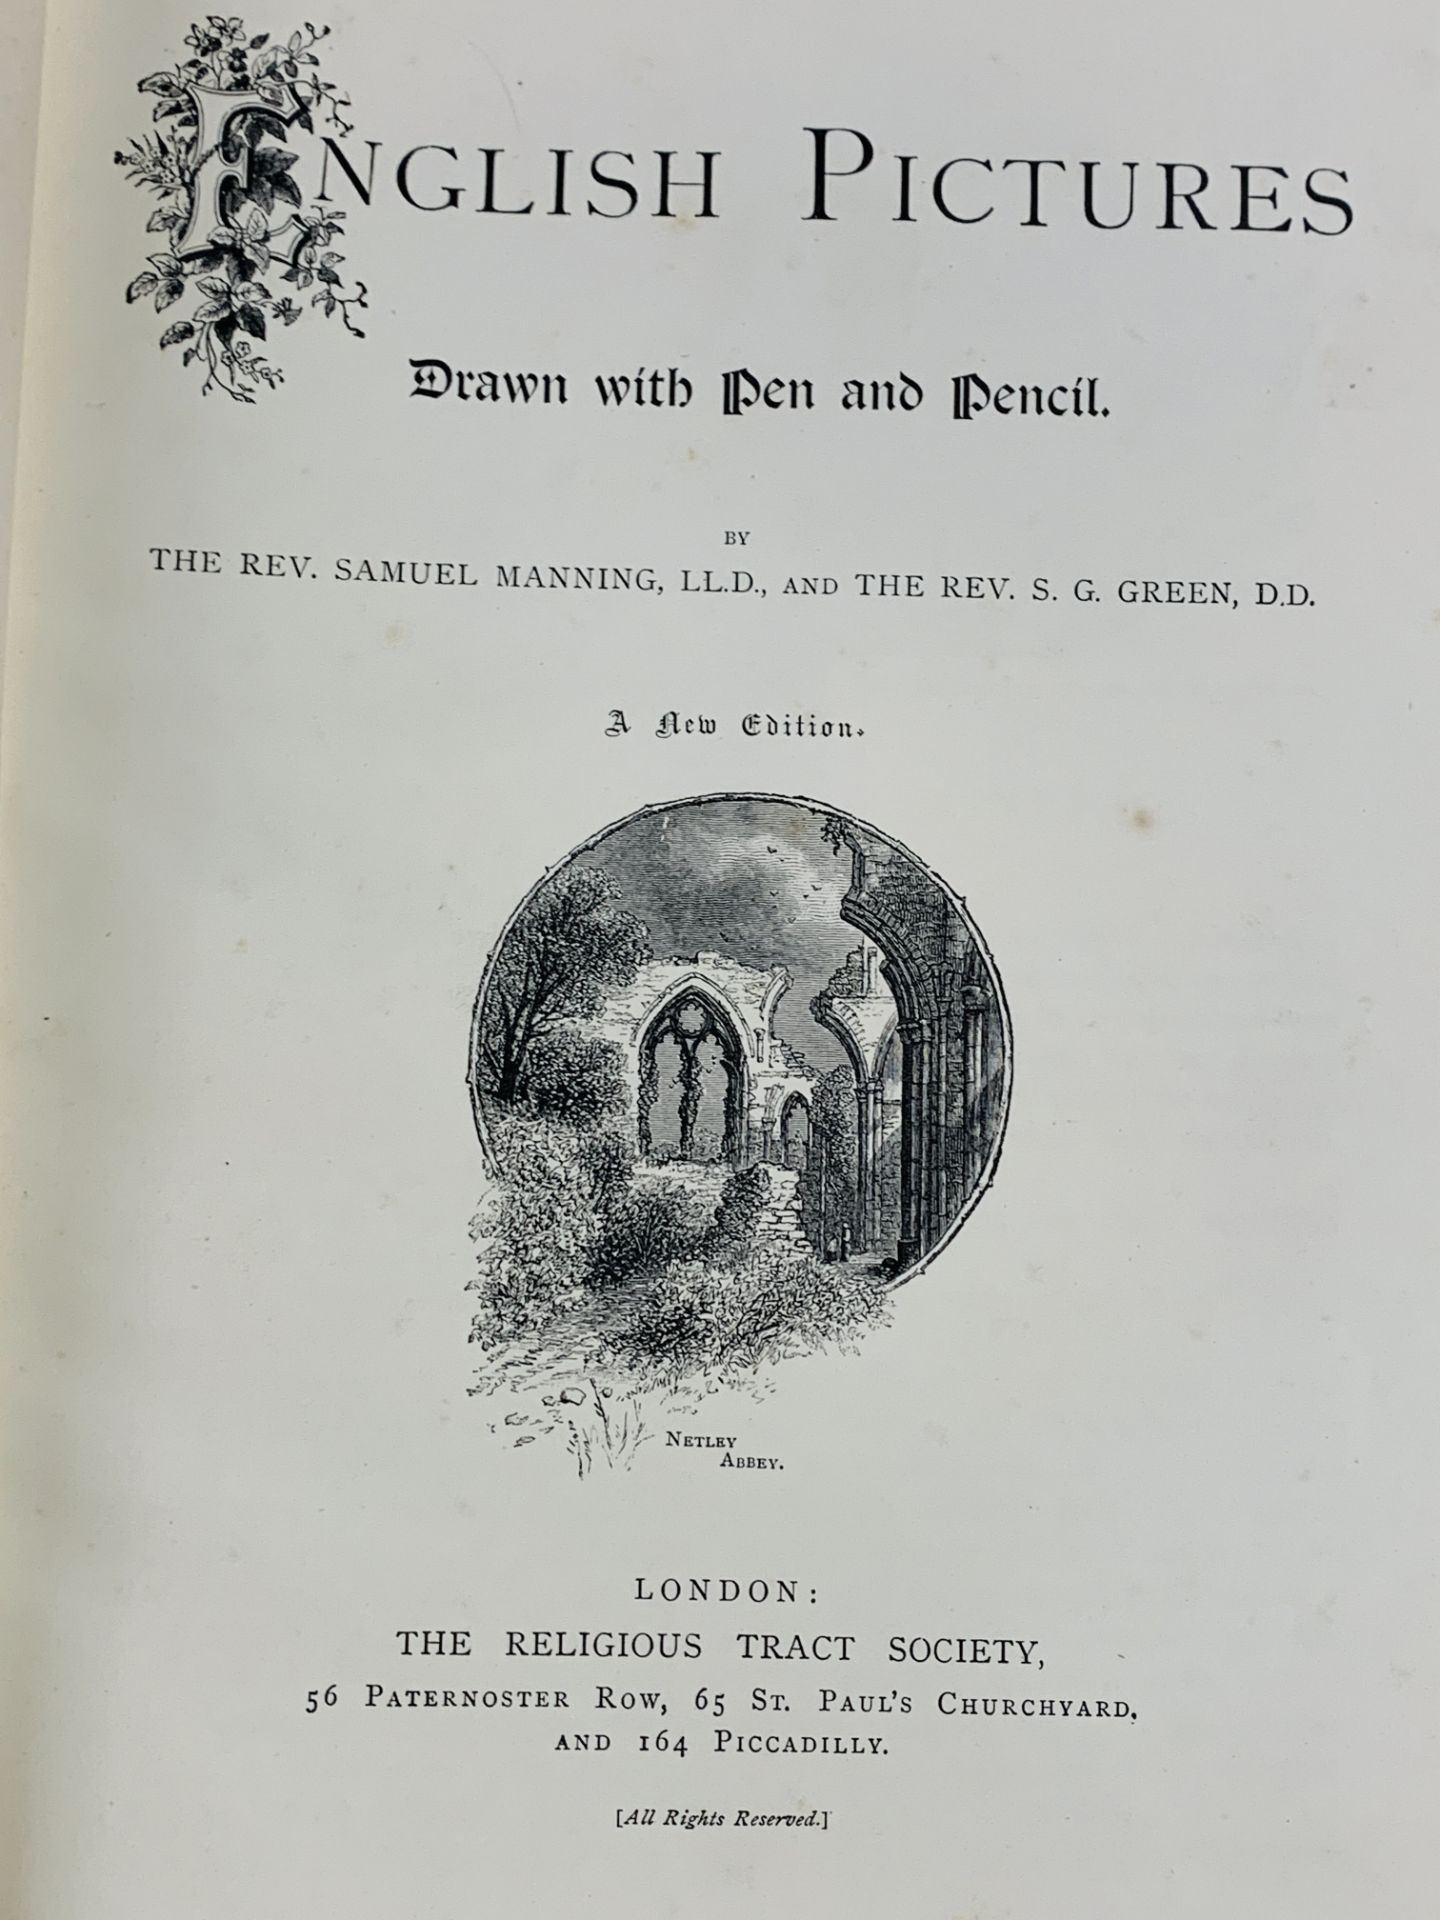 English Pictures and Welsh Pictures, 2 volumes circa 1890 - Image 2 of 6